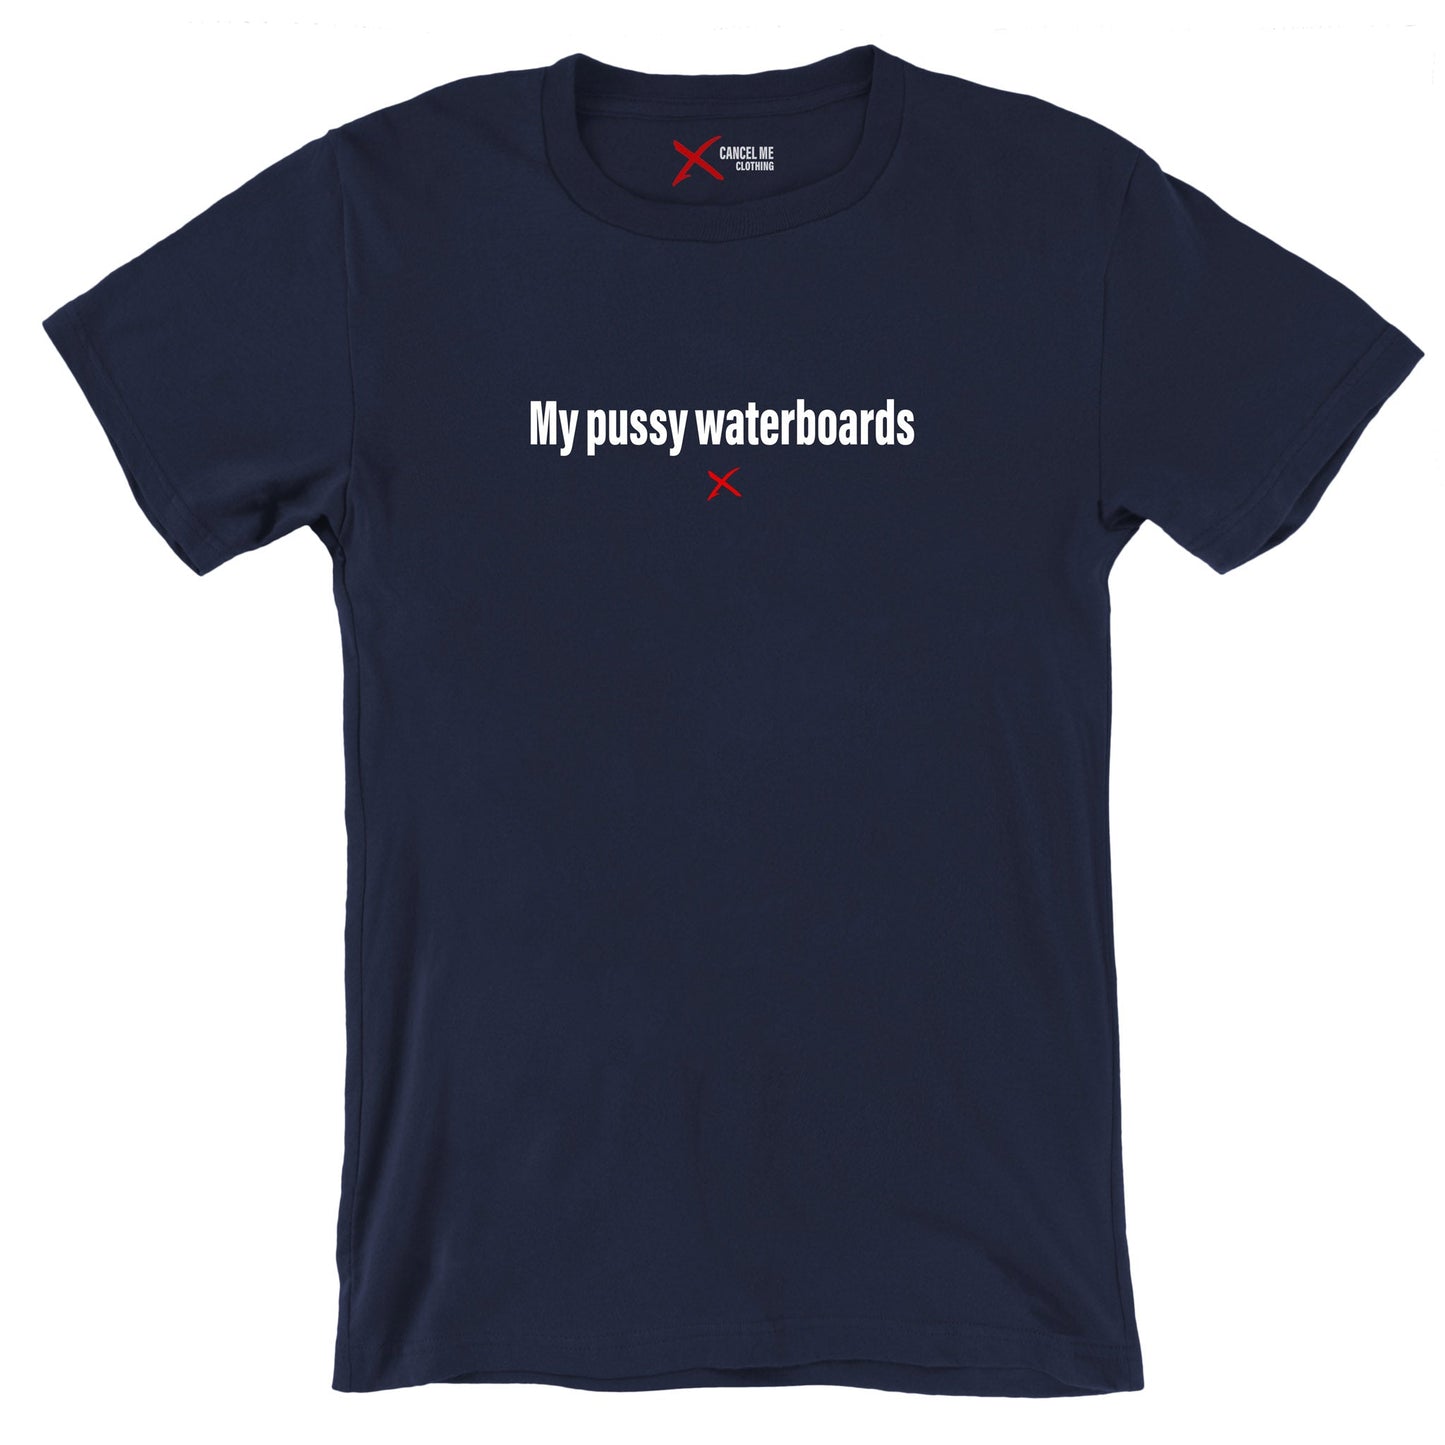 My pussy waterboards - Shirt